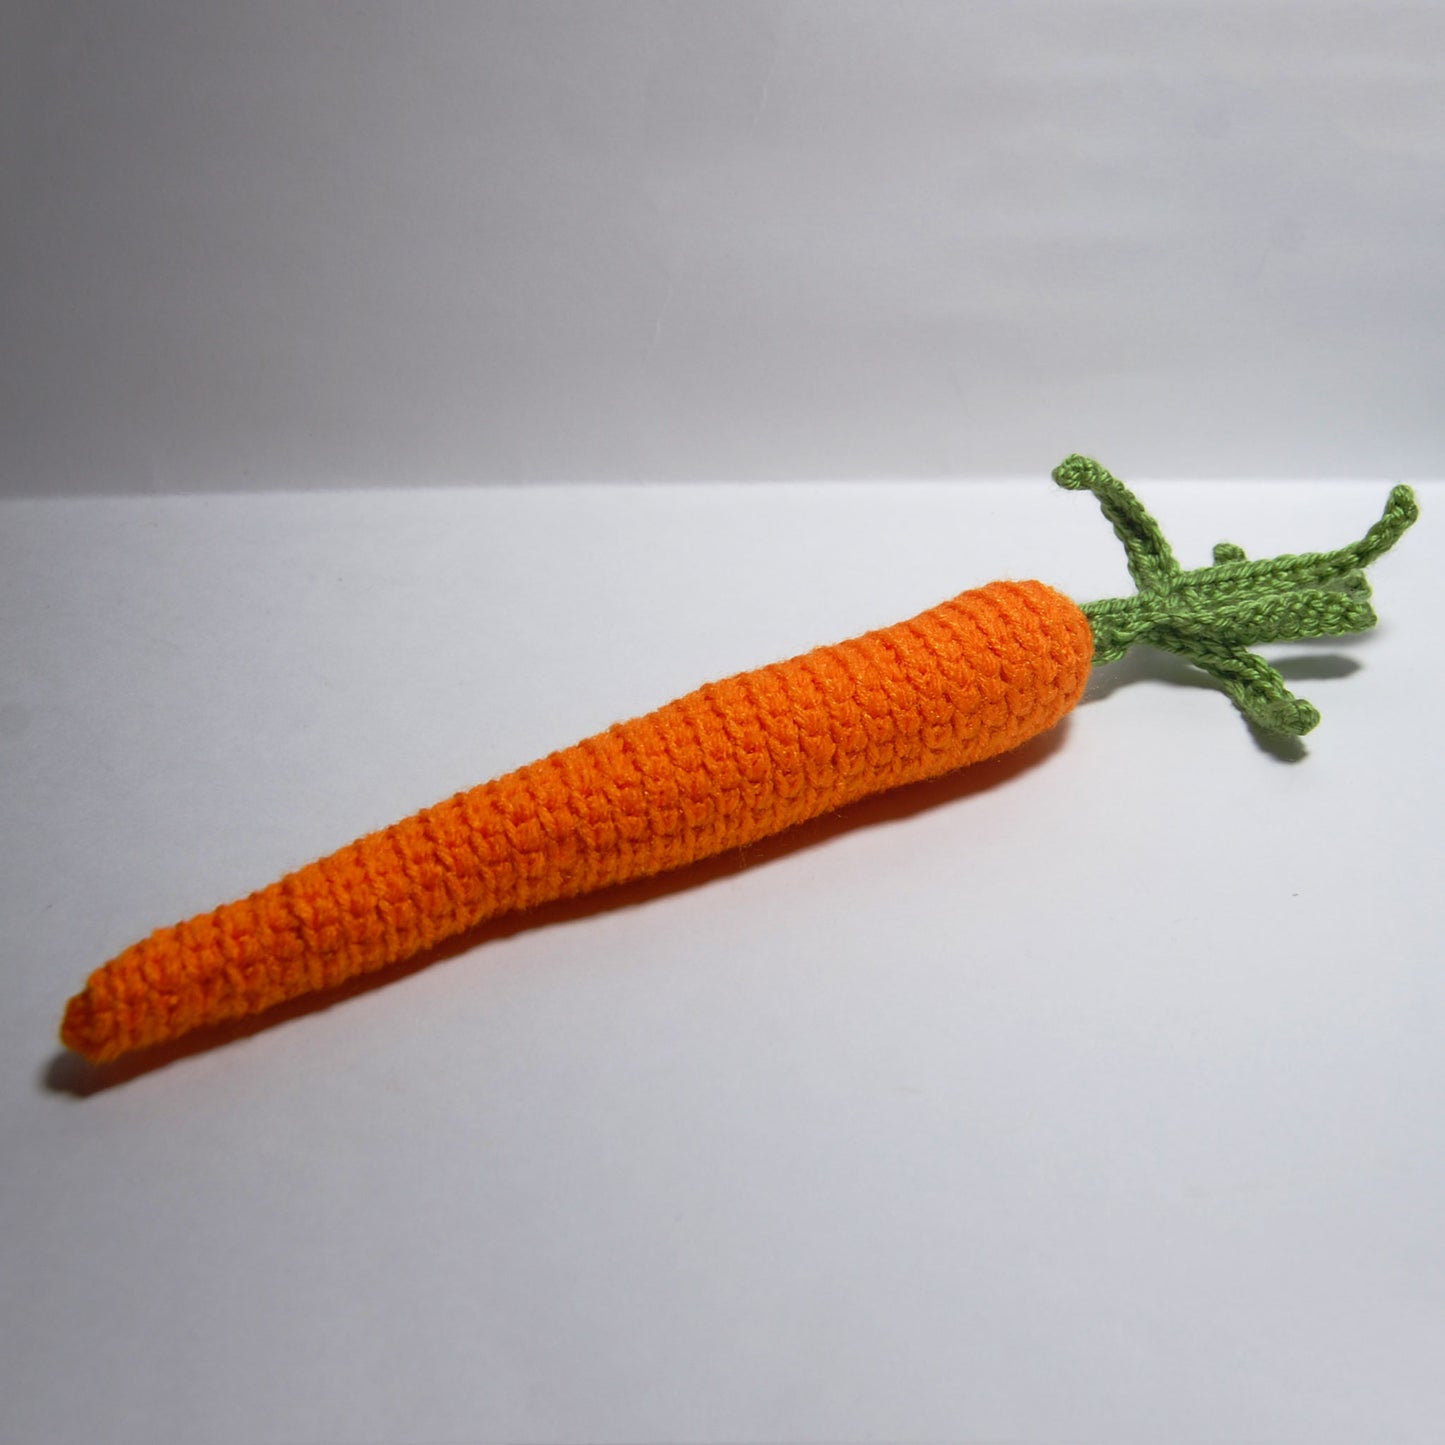 Carrot Crochet Pattern + Coloring Page